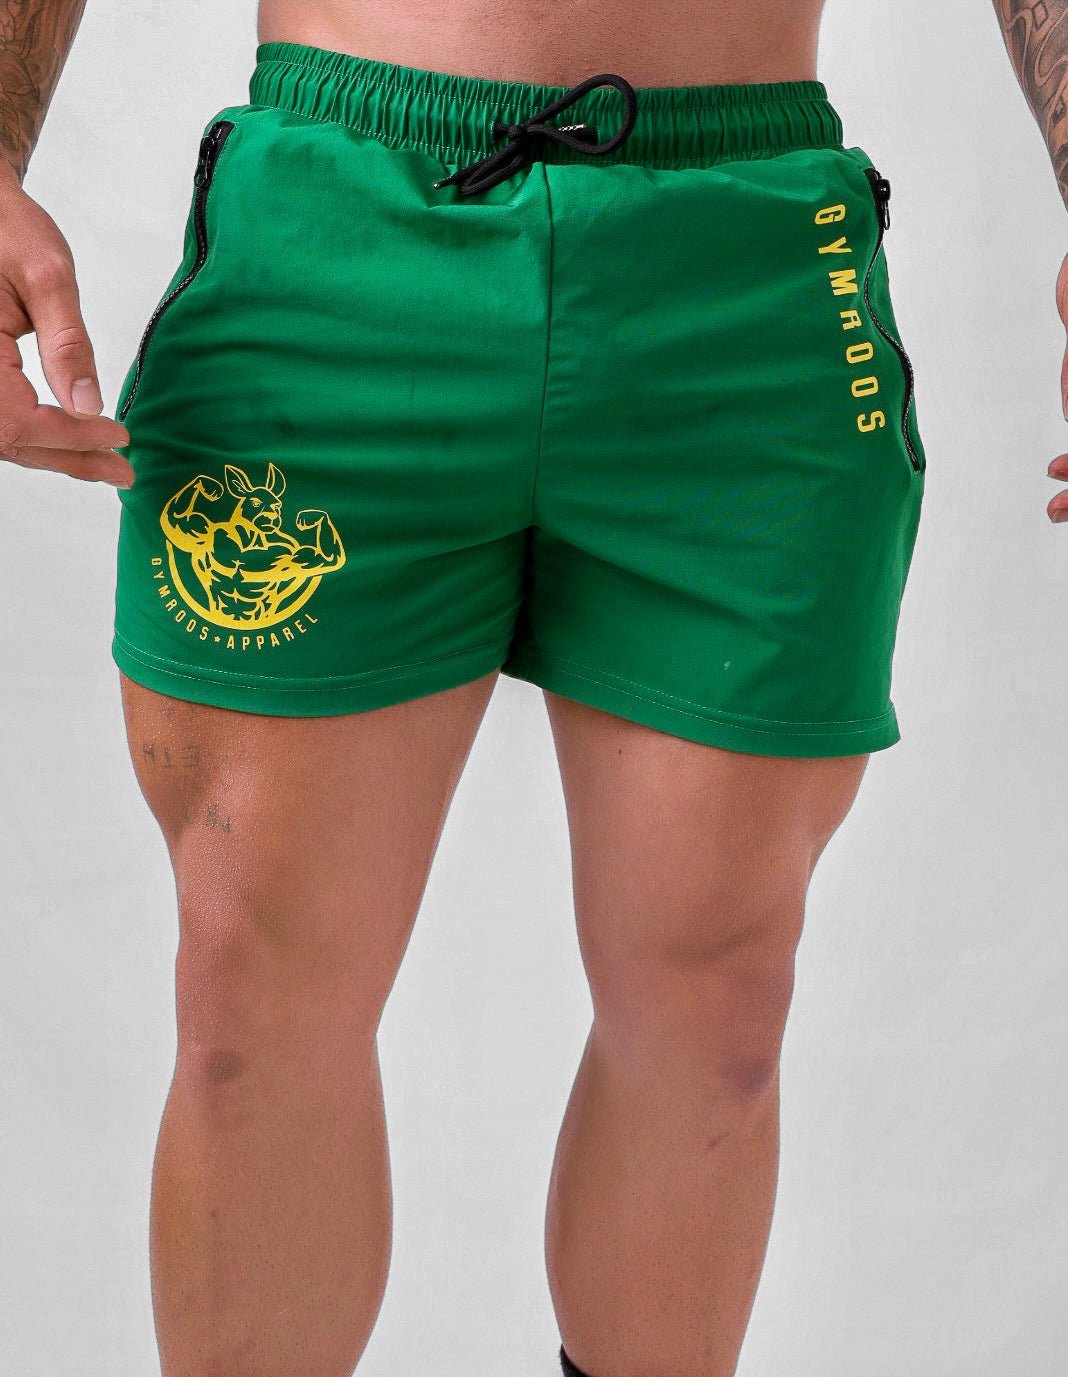 Roo Shorts - Green & Gold - GYMROOS